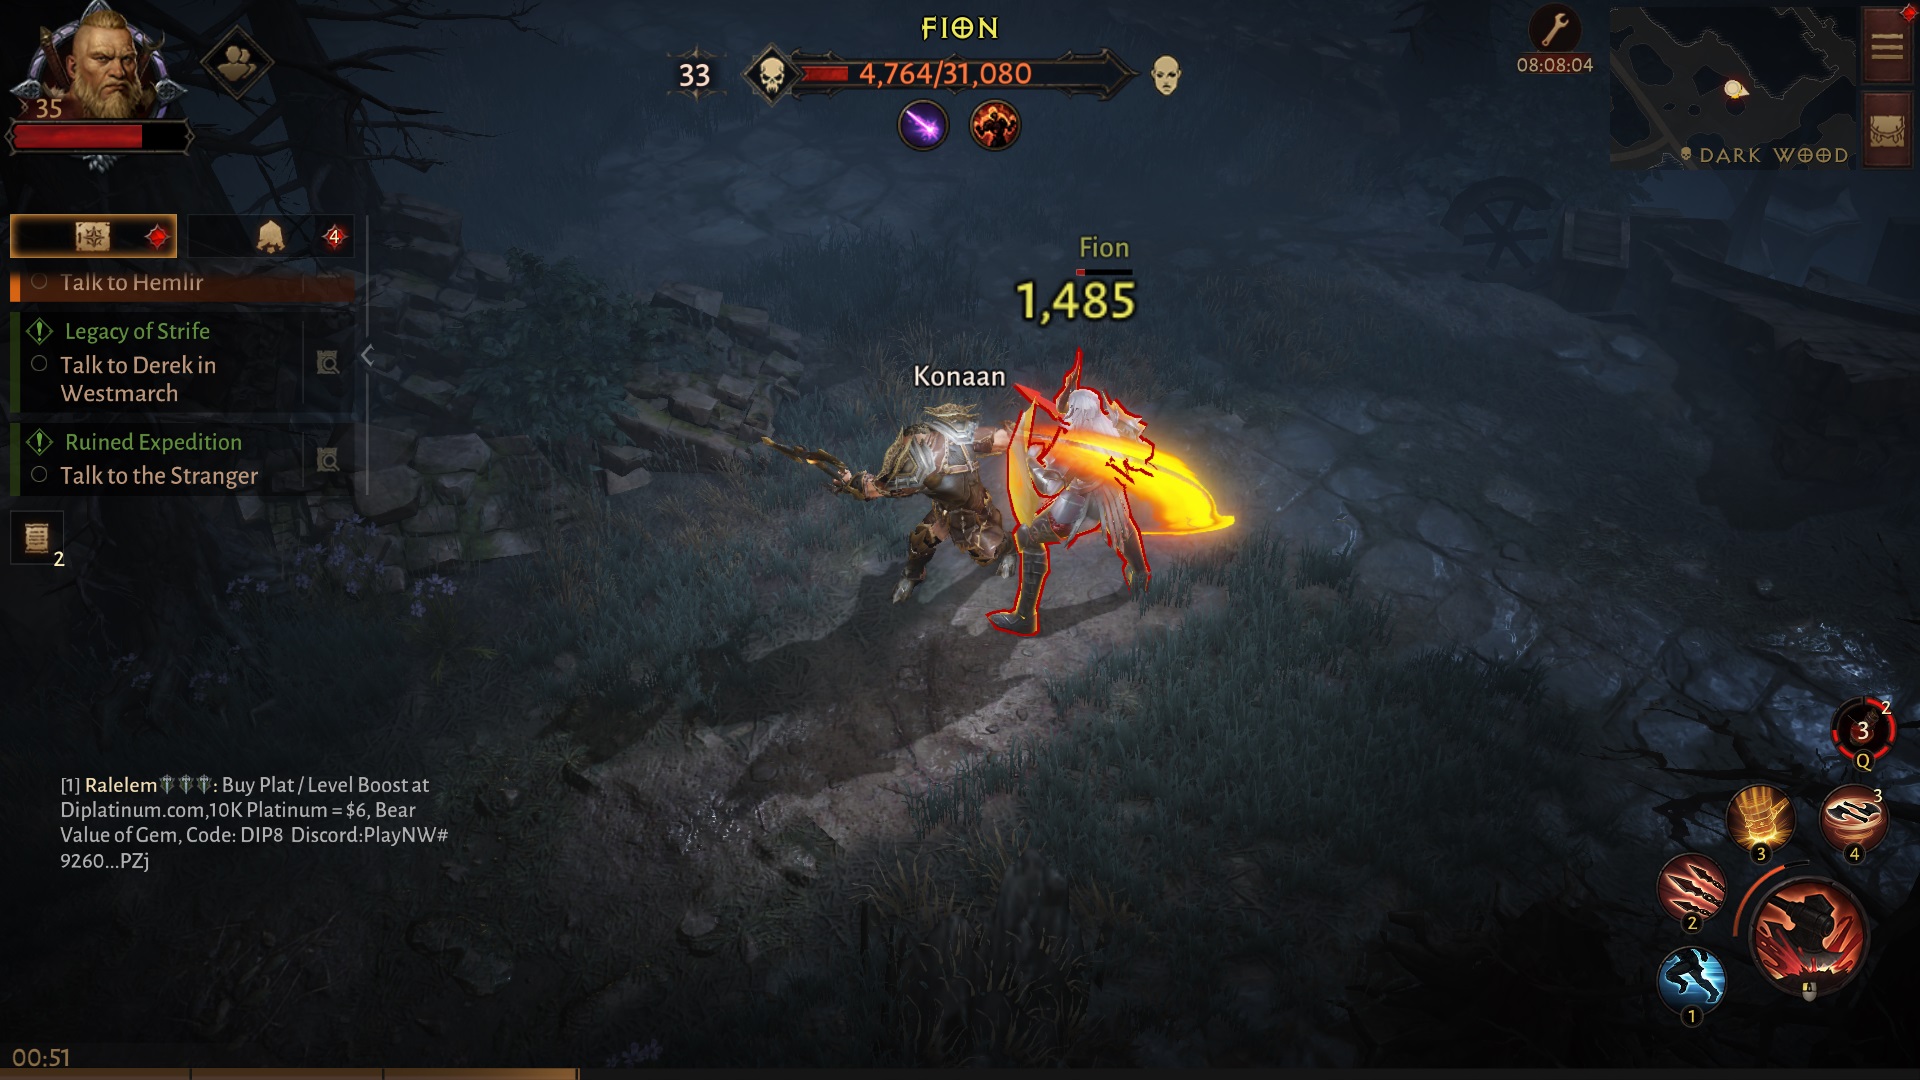 Diablo Immortal Content Update - New Legendary Items, Hell Difficulty Changes, New Clan-based Limited Time Event, and more